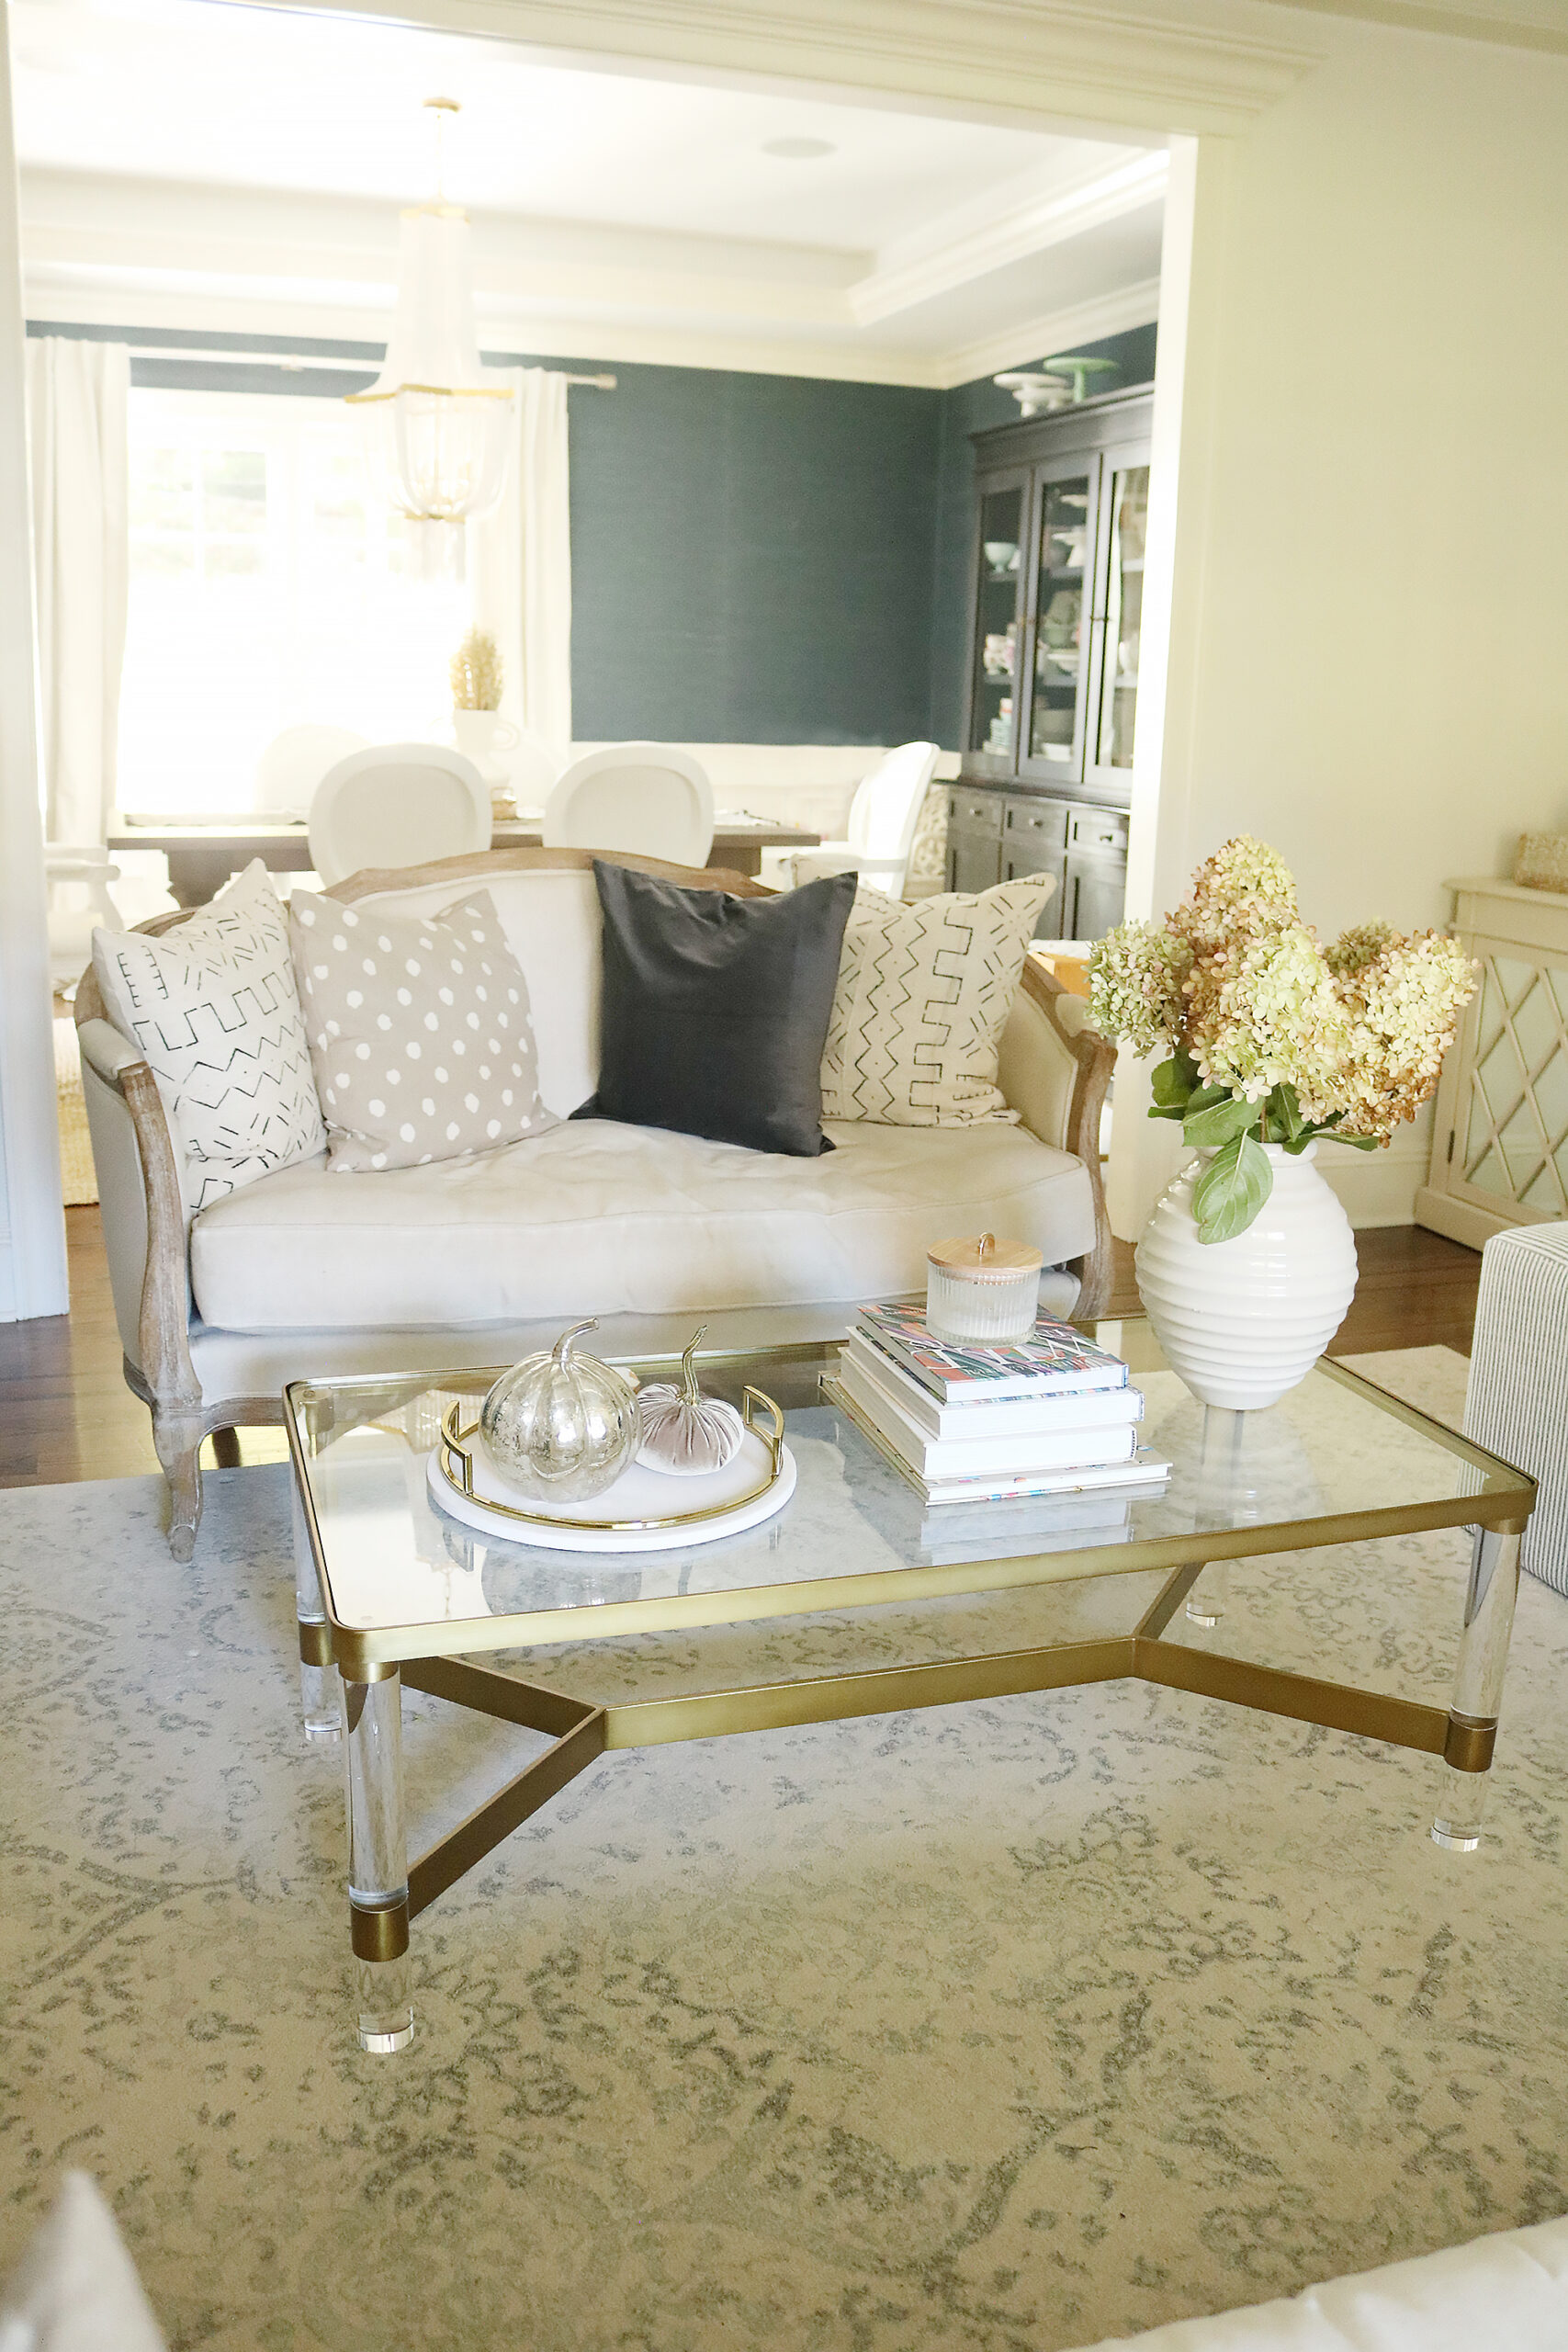 After months of searching for the perfect coffee table, I have rounded up beautiful and sturdy well-made Coffee Tables Under $1000 || Darling Darleen Top CT Lifestyle Blogger  #coffeetable